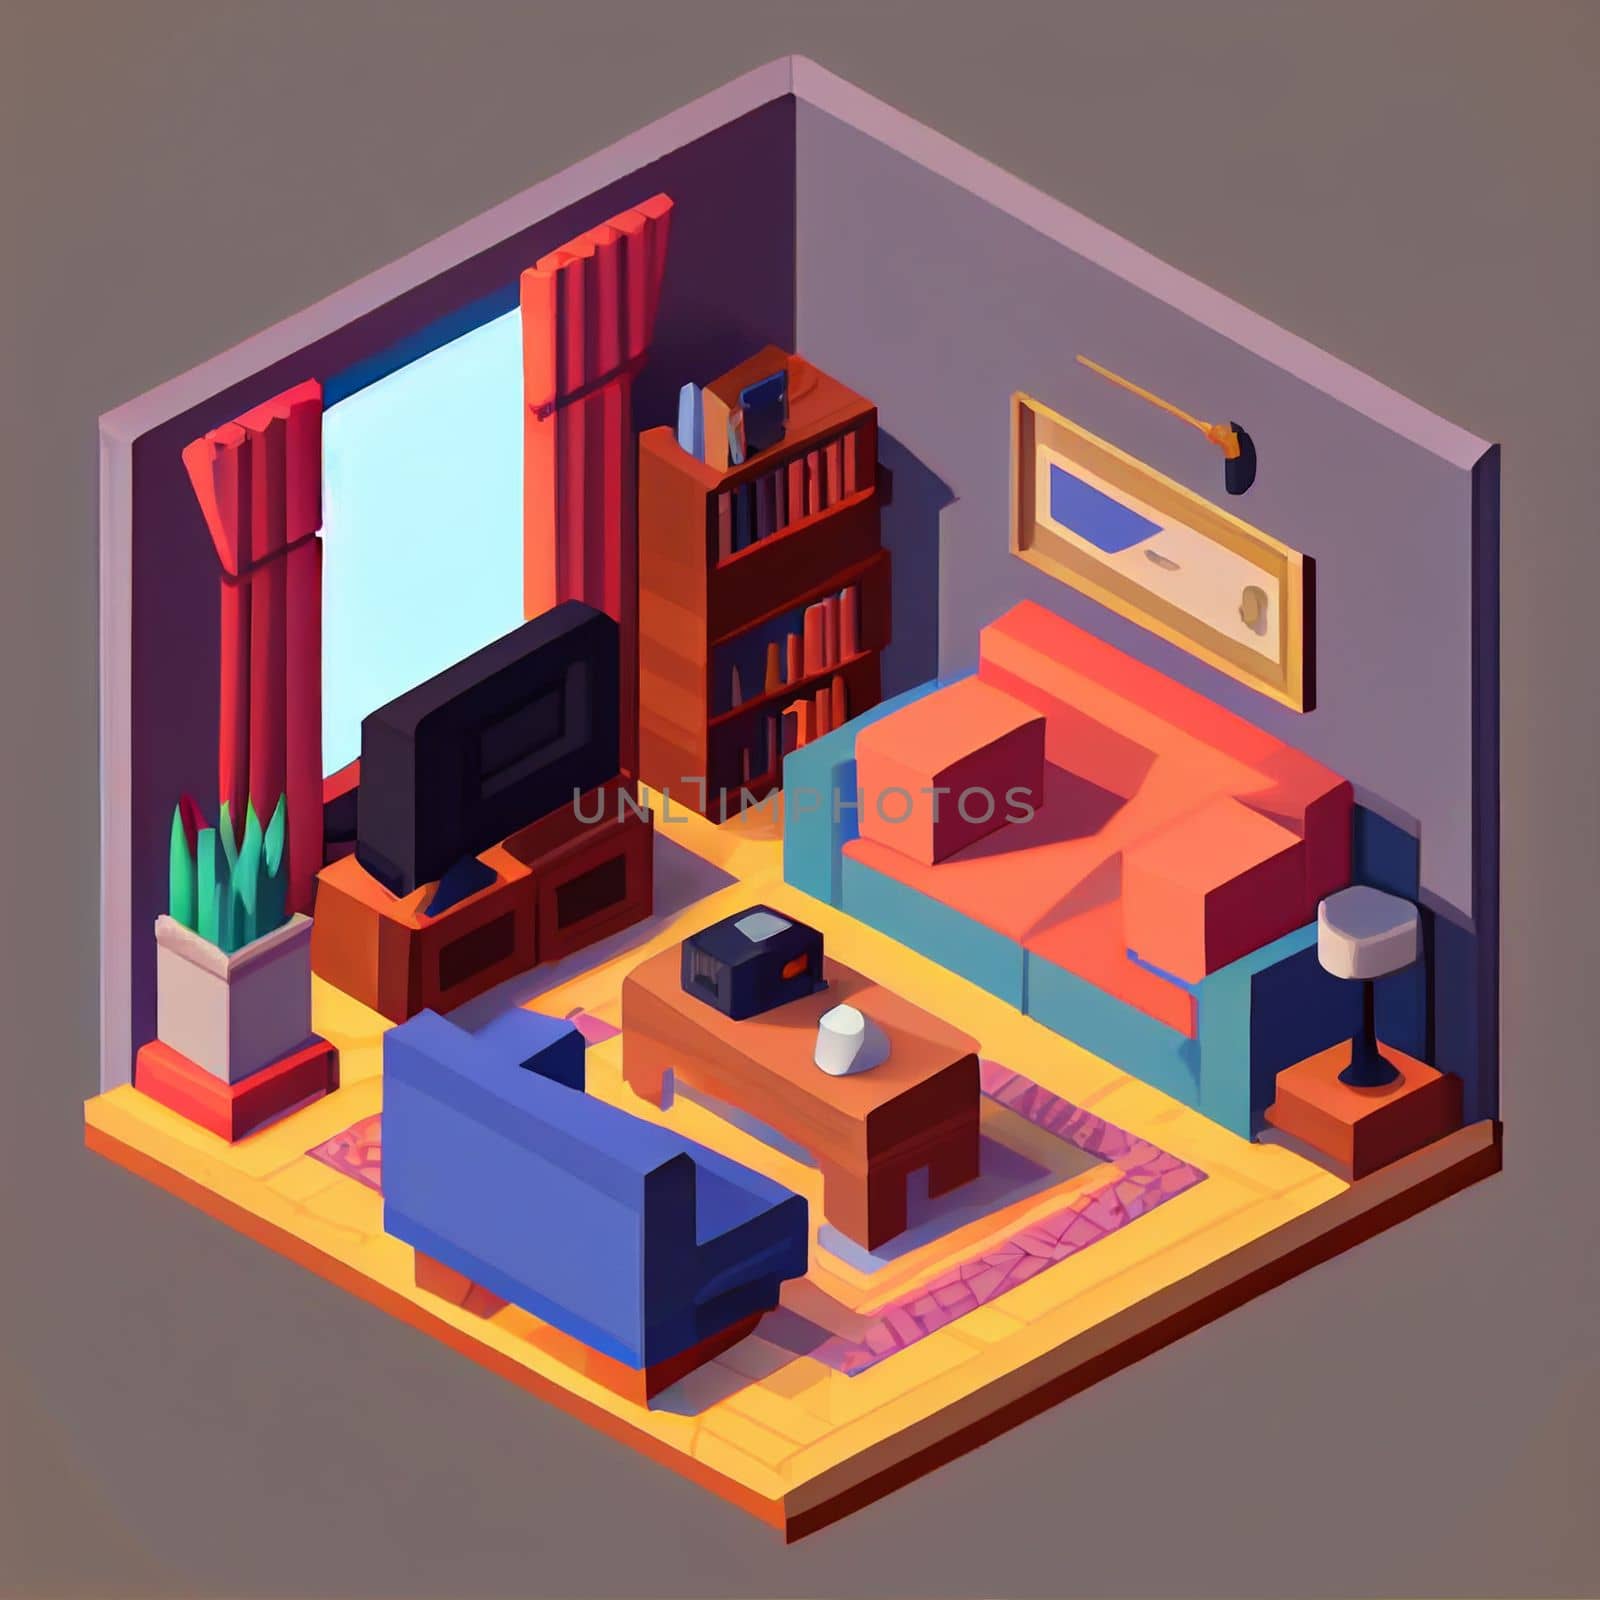 3d illustration isometric interior cute design. Living room includes a lot of voluminous objects and details. by FokasuArt